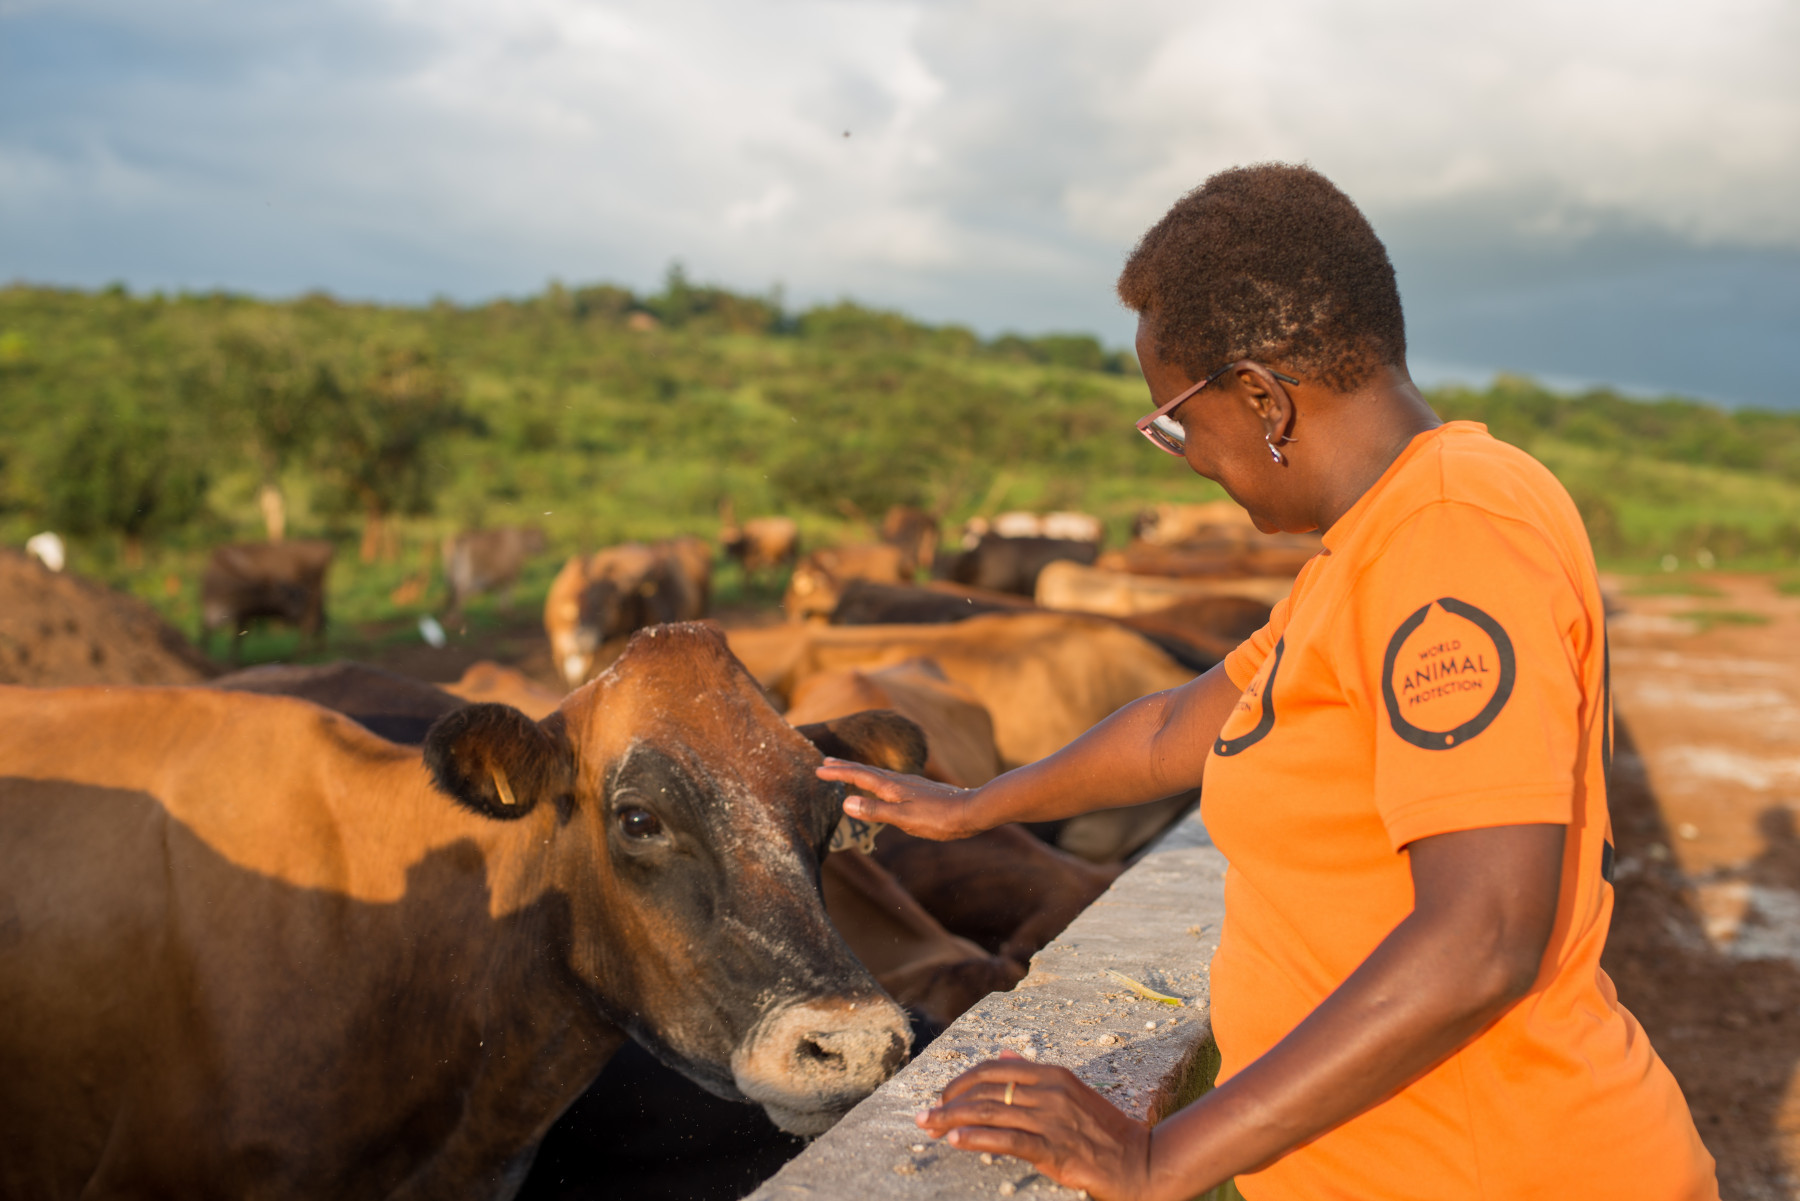 A World Animal Protection member with dairy cows